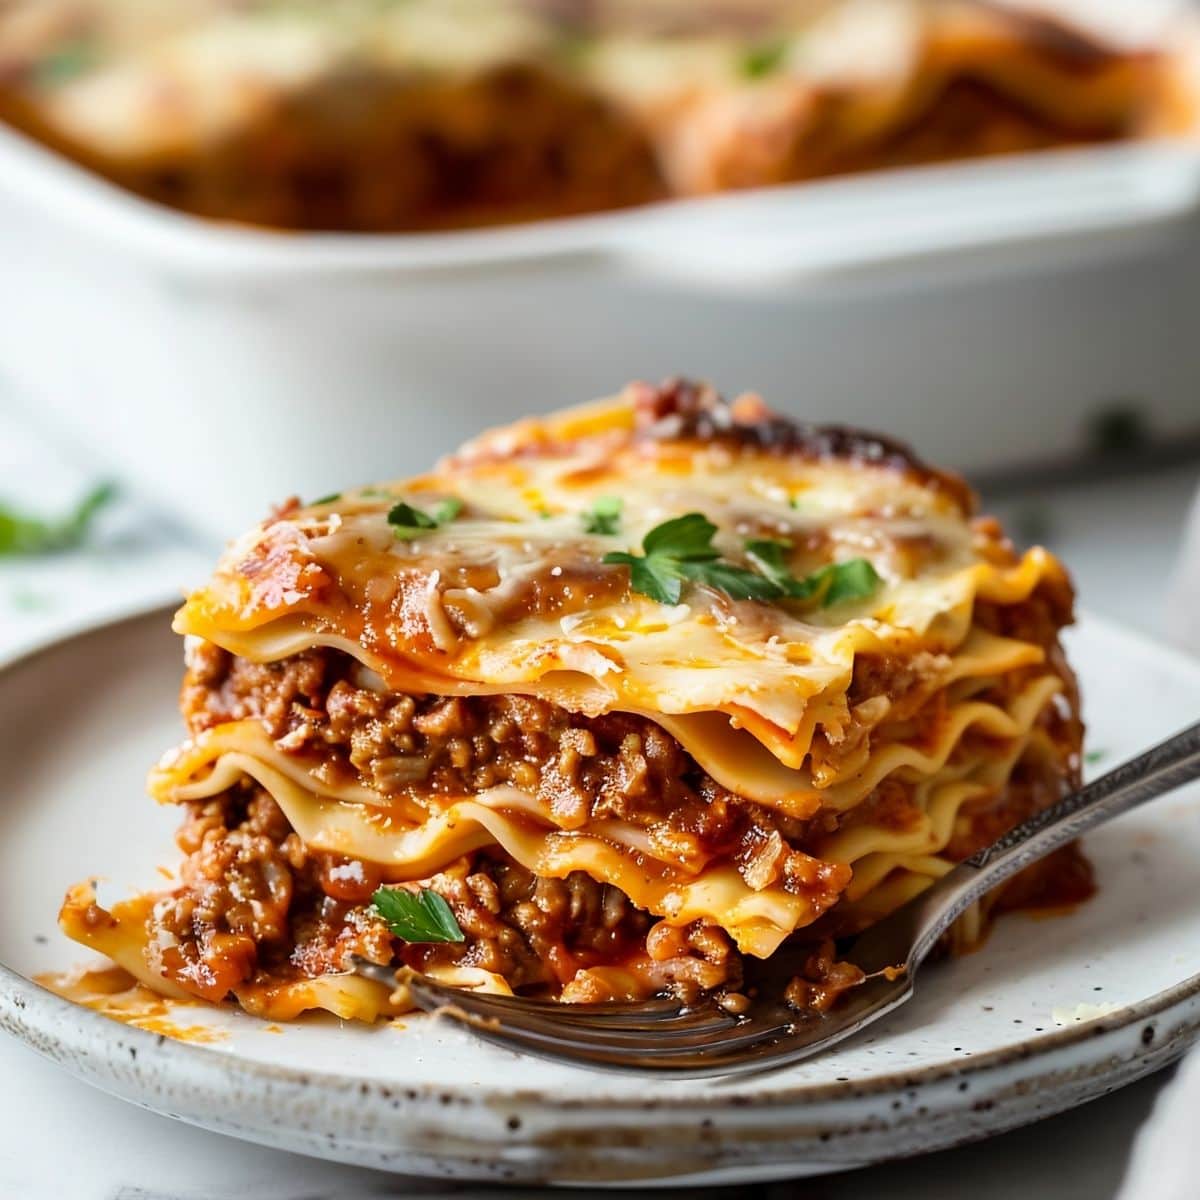 Slice of Prego Lasagna- Layers of Noodles, Meat Sauce, and Melty Cheese- on a Plate with a Fork